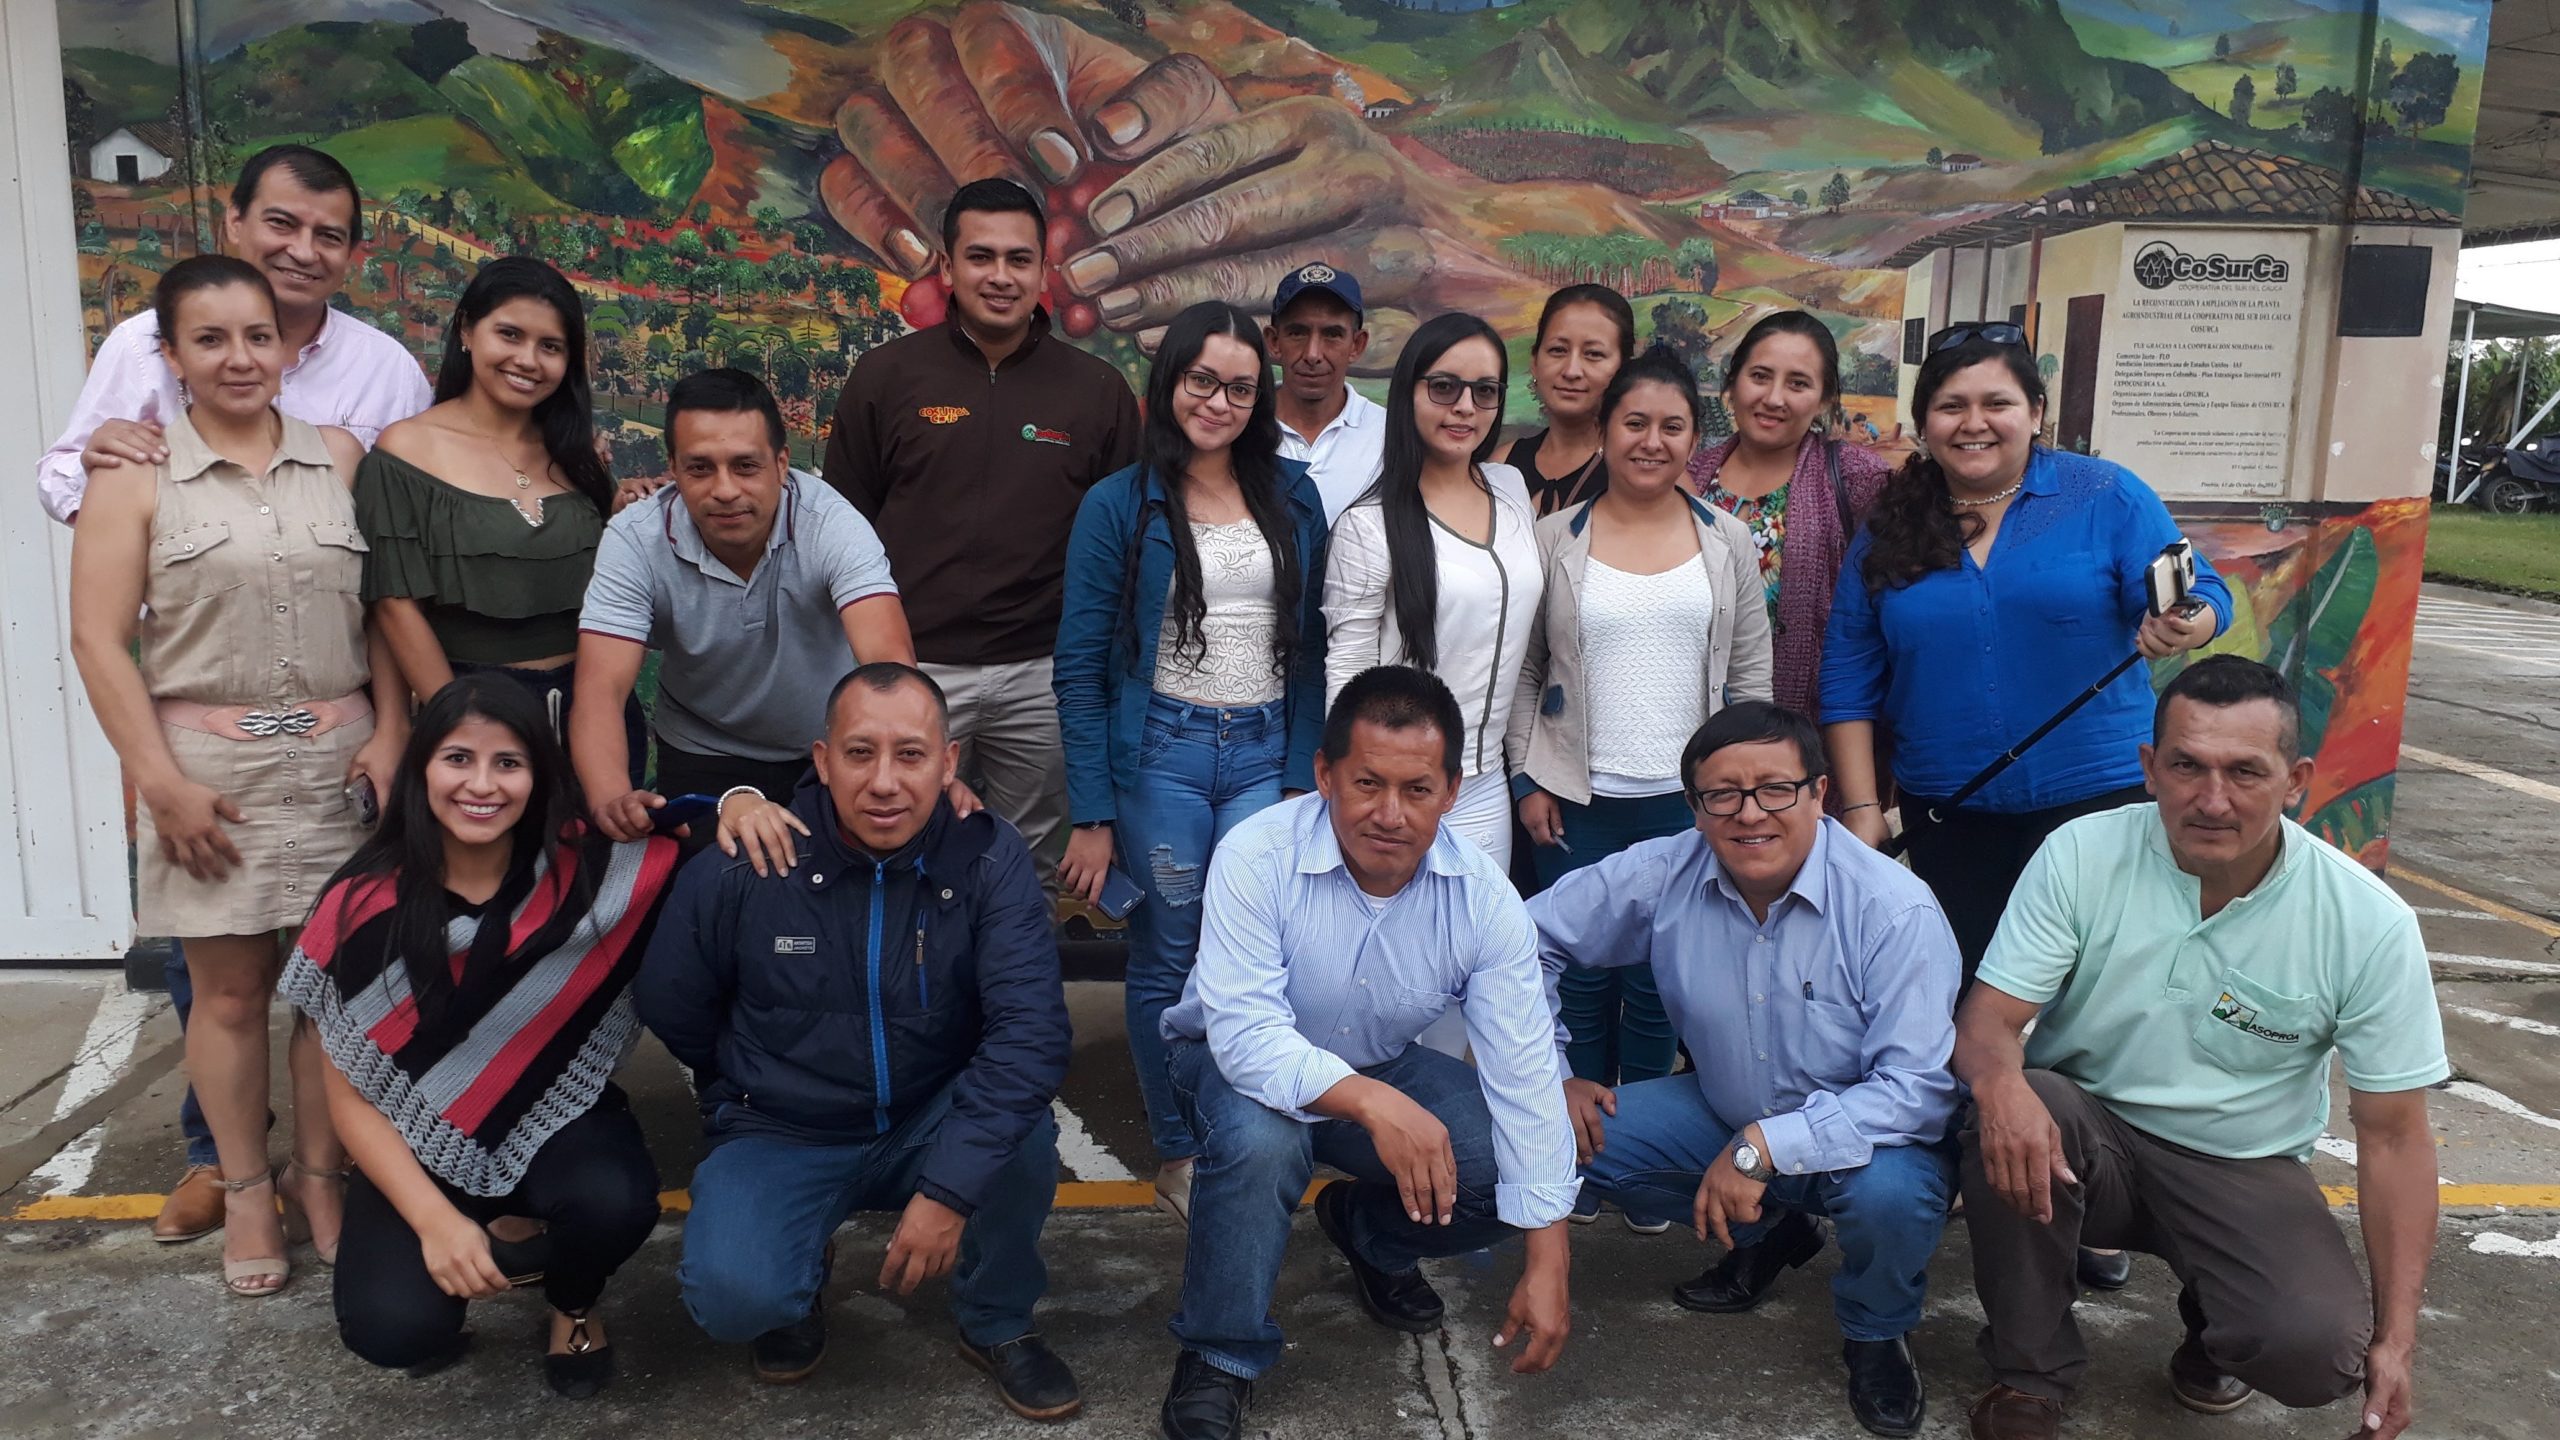 Some of the staff of CoSurCa outside of the cooperative offices following a Root Capital advisory services workshop.